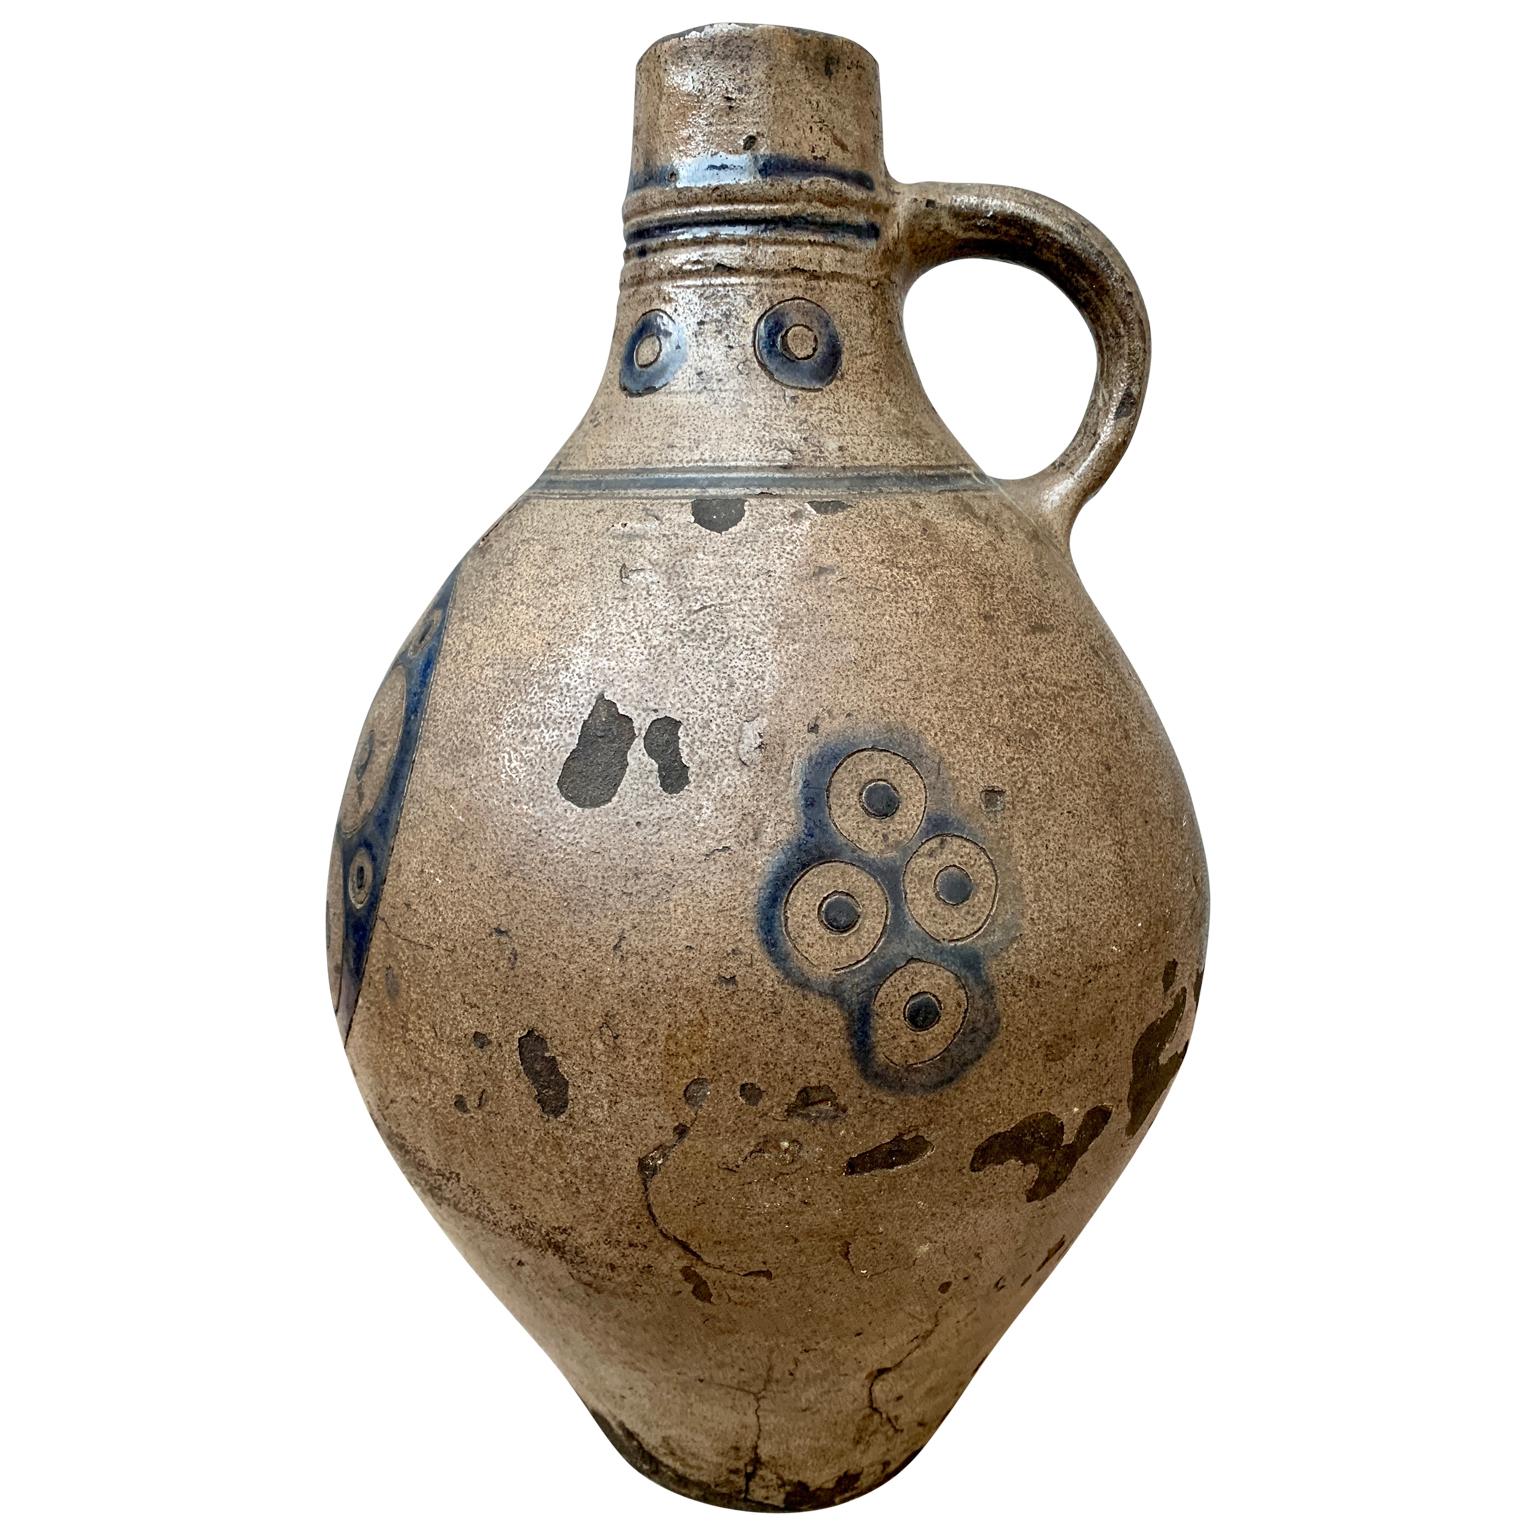 An 18th century European ceramic pitcher, most probably from Germany, with glazed decoration in blue colour representing flowers on a beige background. It has most probably been used for serving wine.